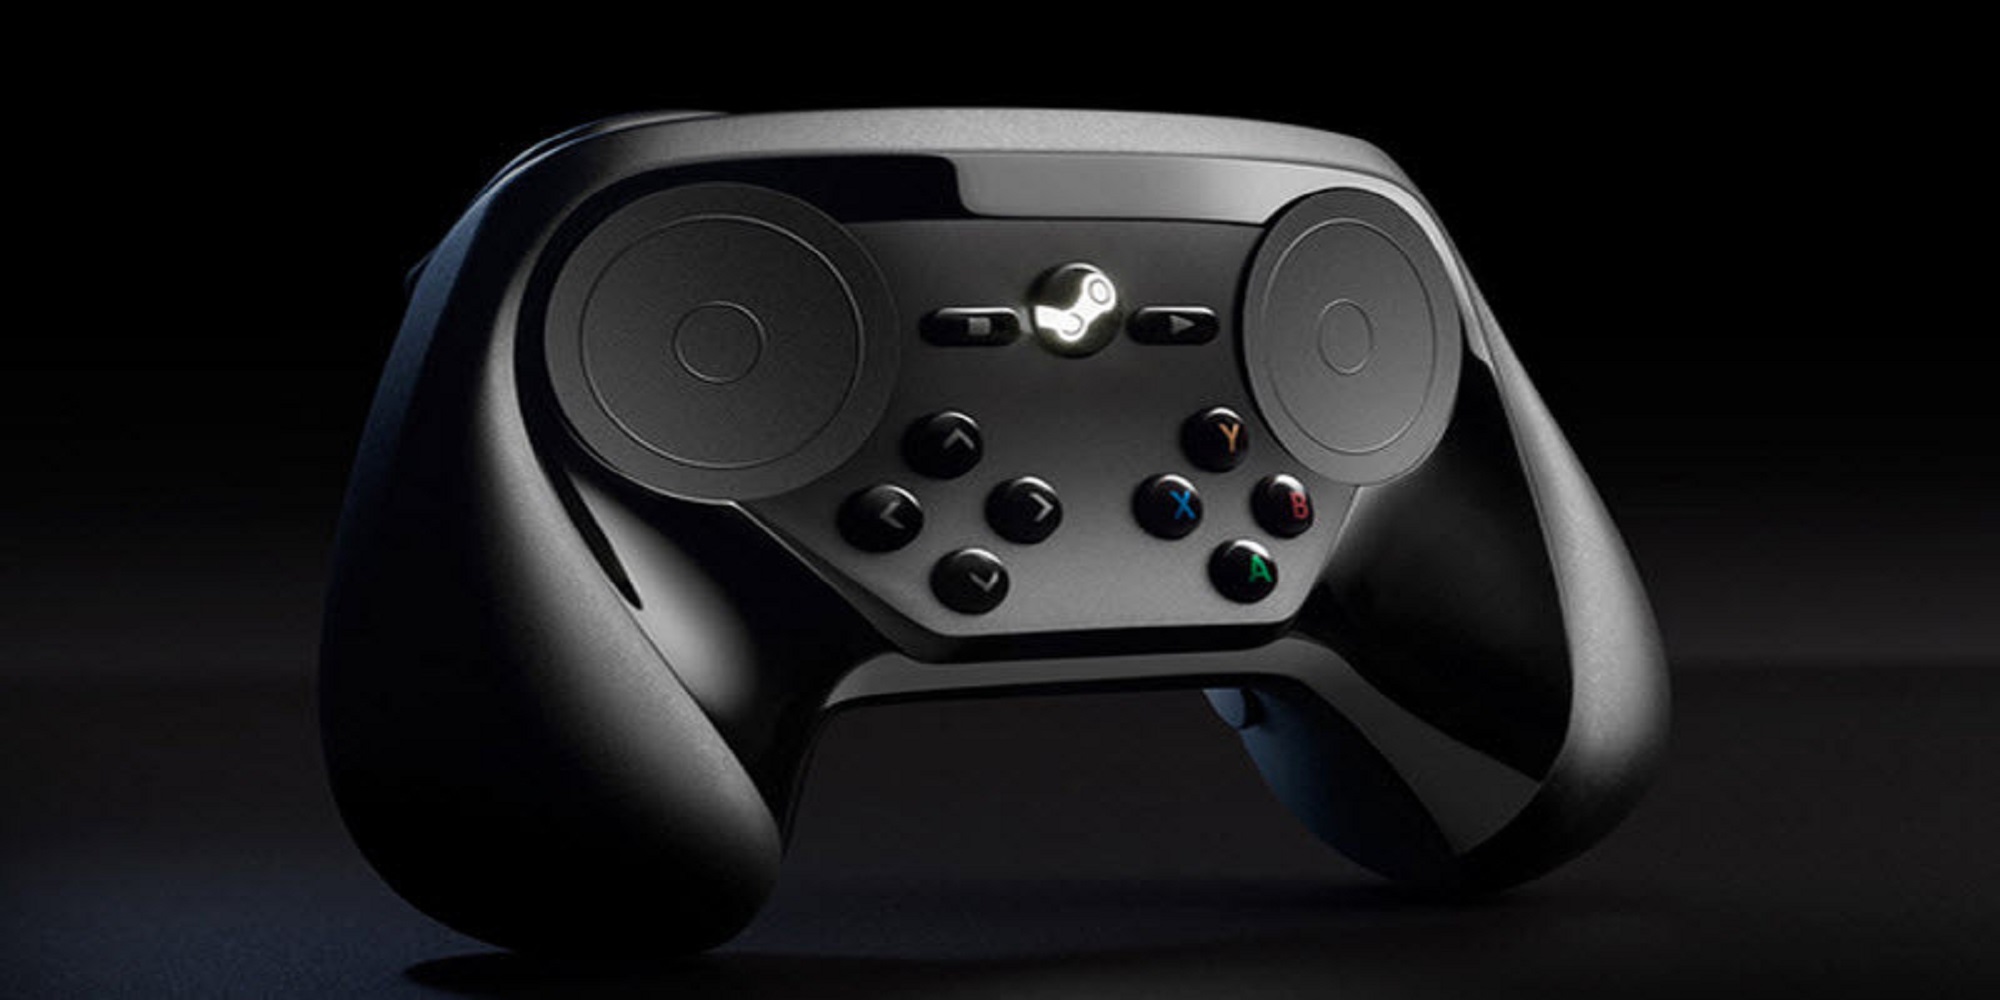 The Steam controller is a unique piece of machinery.